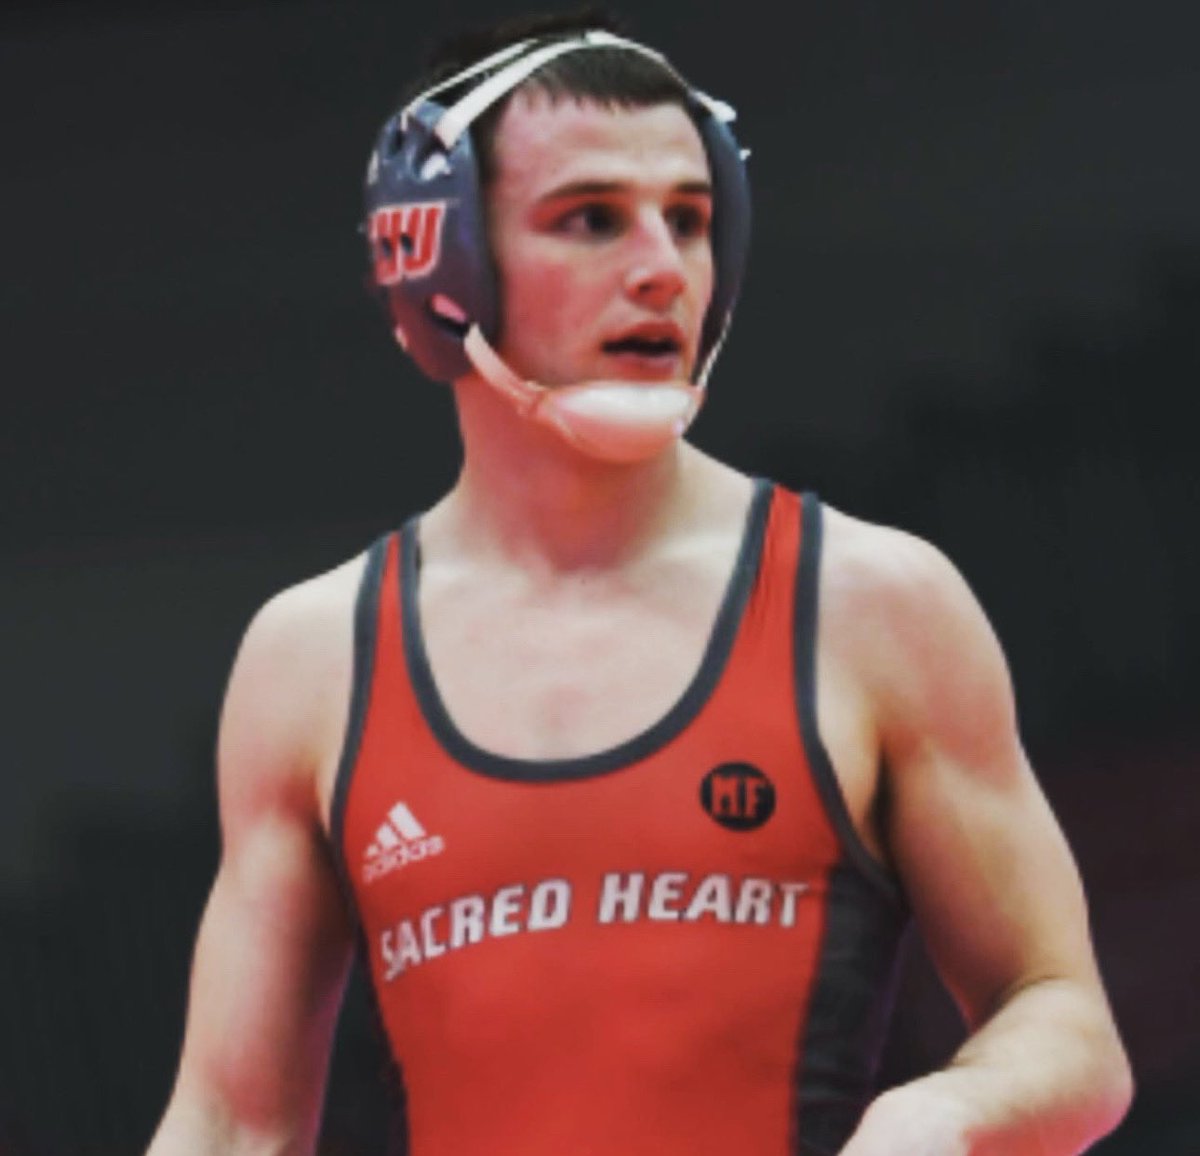 Andrew Fallon just beat the Harvard wrestler and moves to 11-2 on the season!! @NCAAWrestling @FloWrestling @CPyles8 @jasonmbryant @MatScouts1